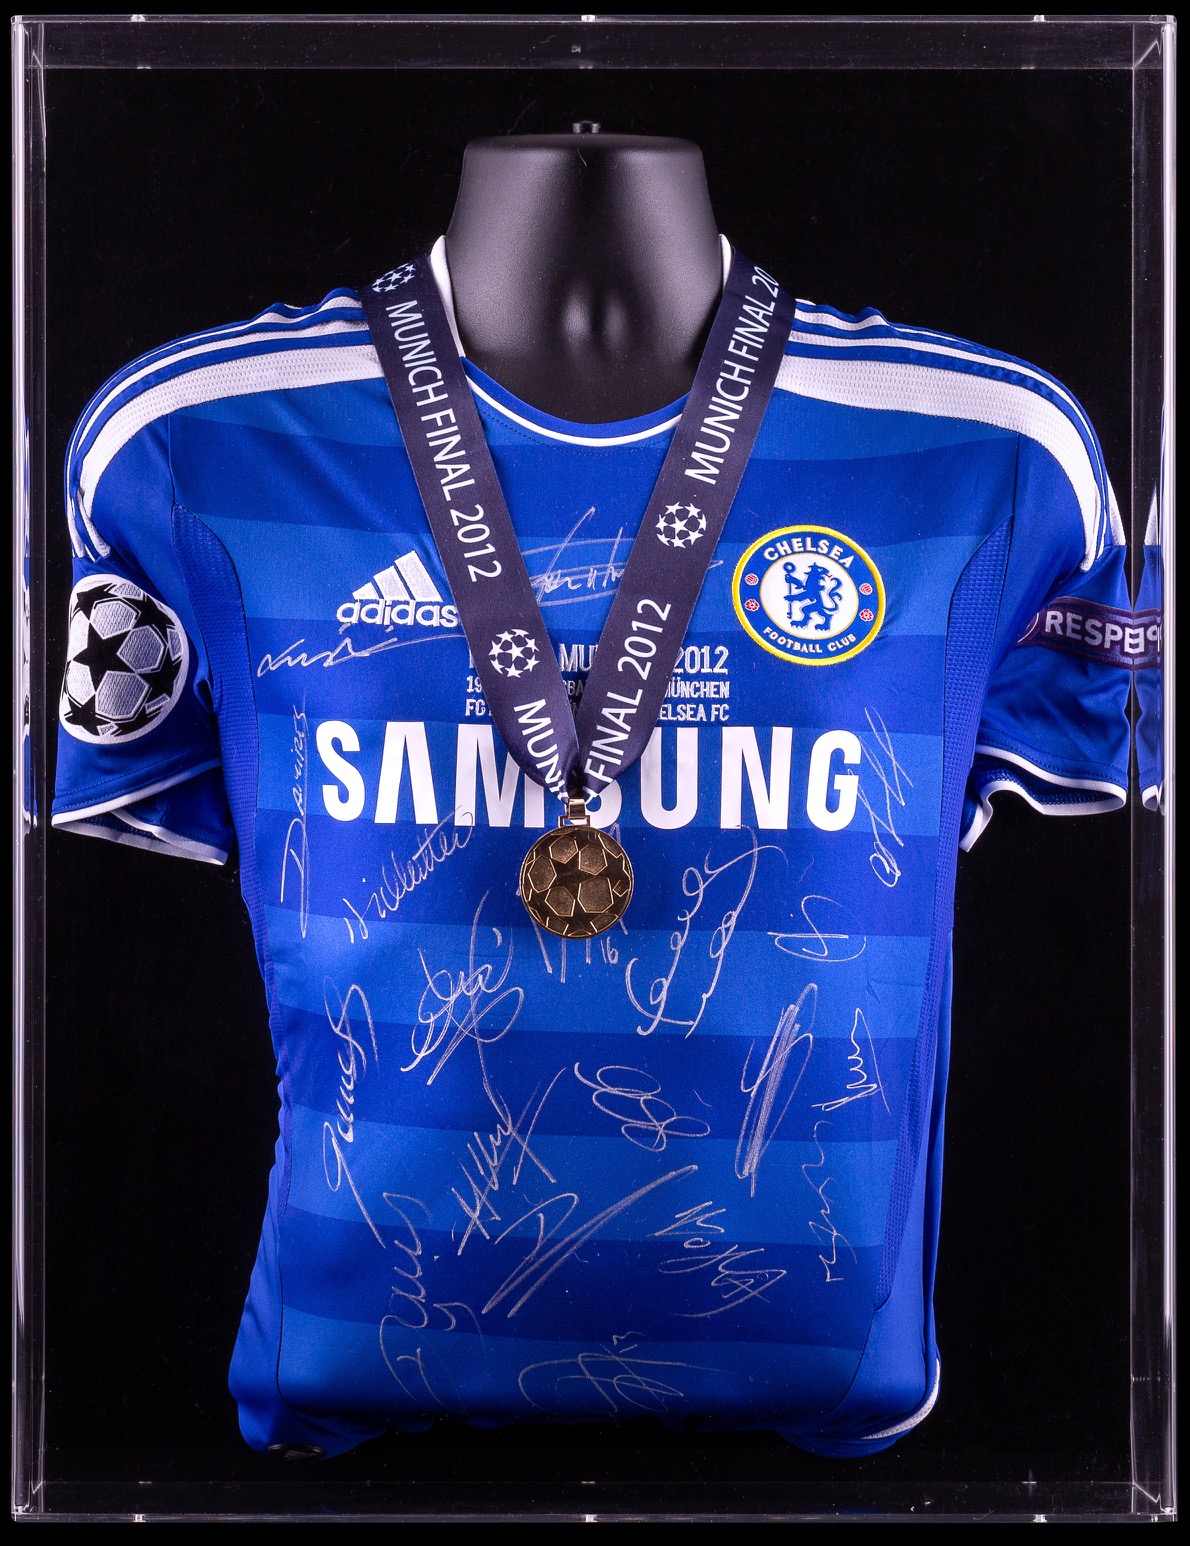 Chelsea UEFA Champions League Final 2012 Team Signed Shirt & Medal Display